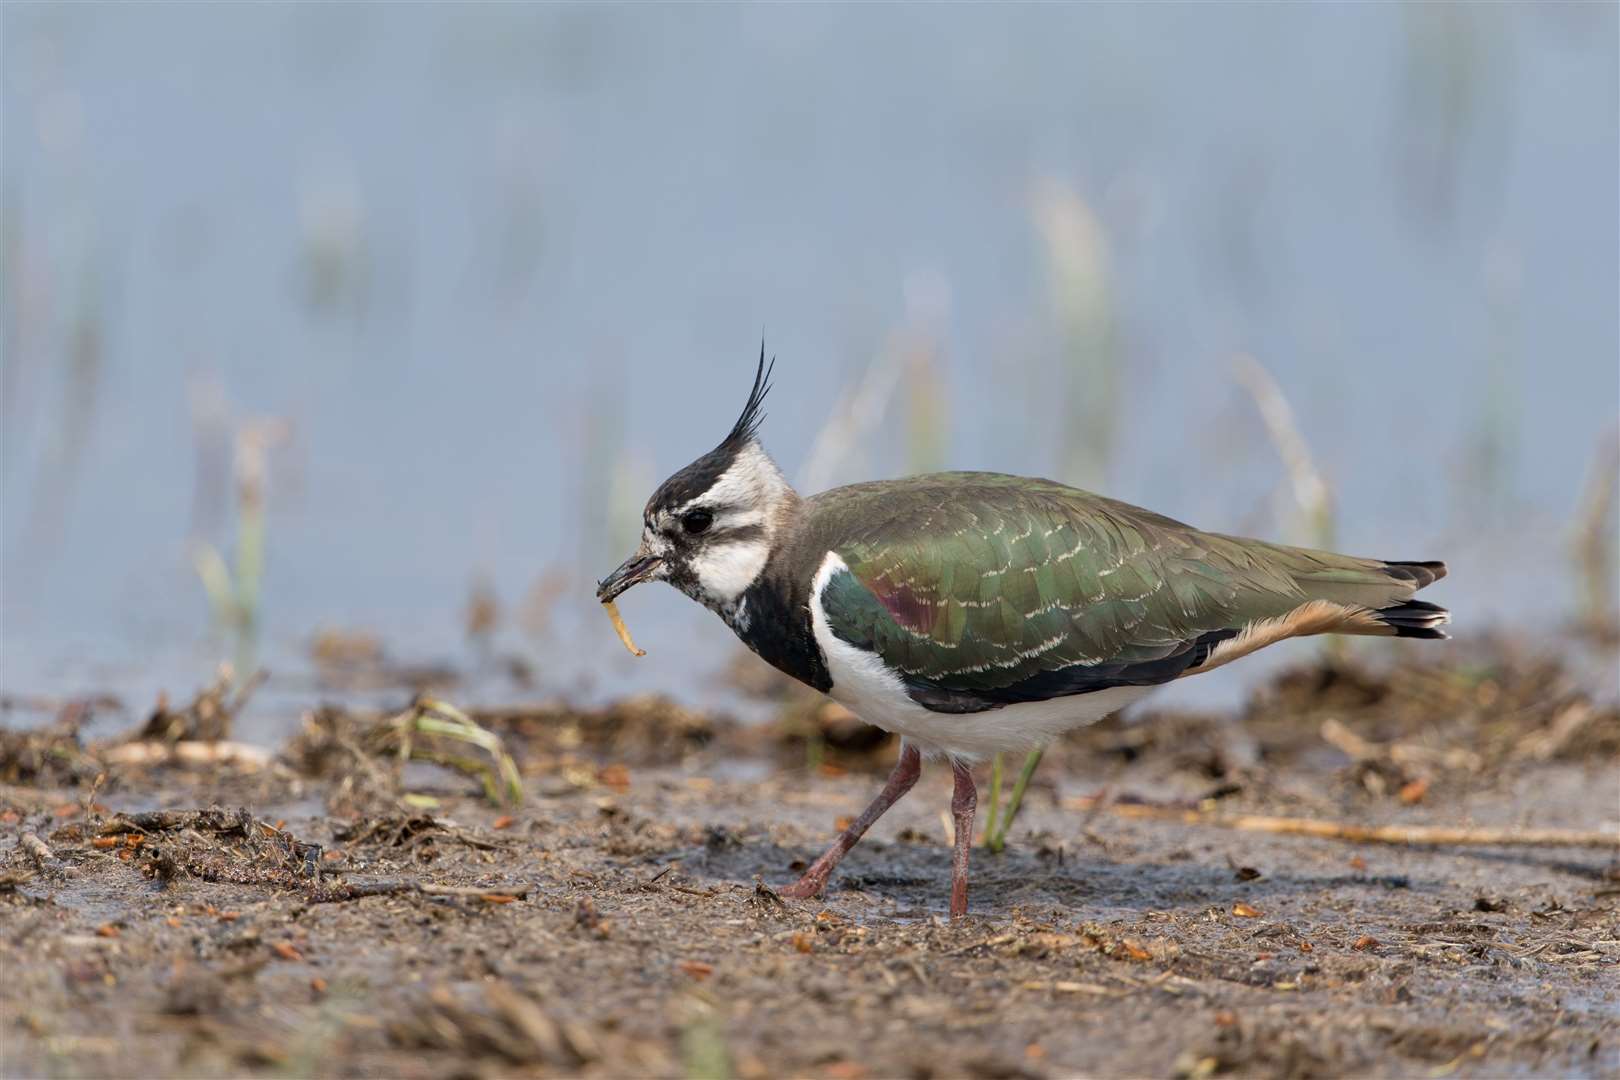 Lapwings can be a rare sight in the area nowadays.